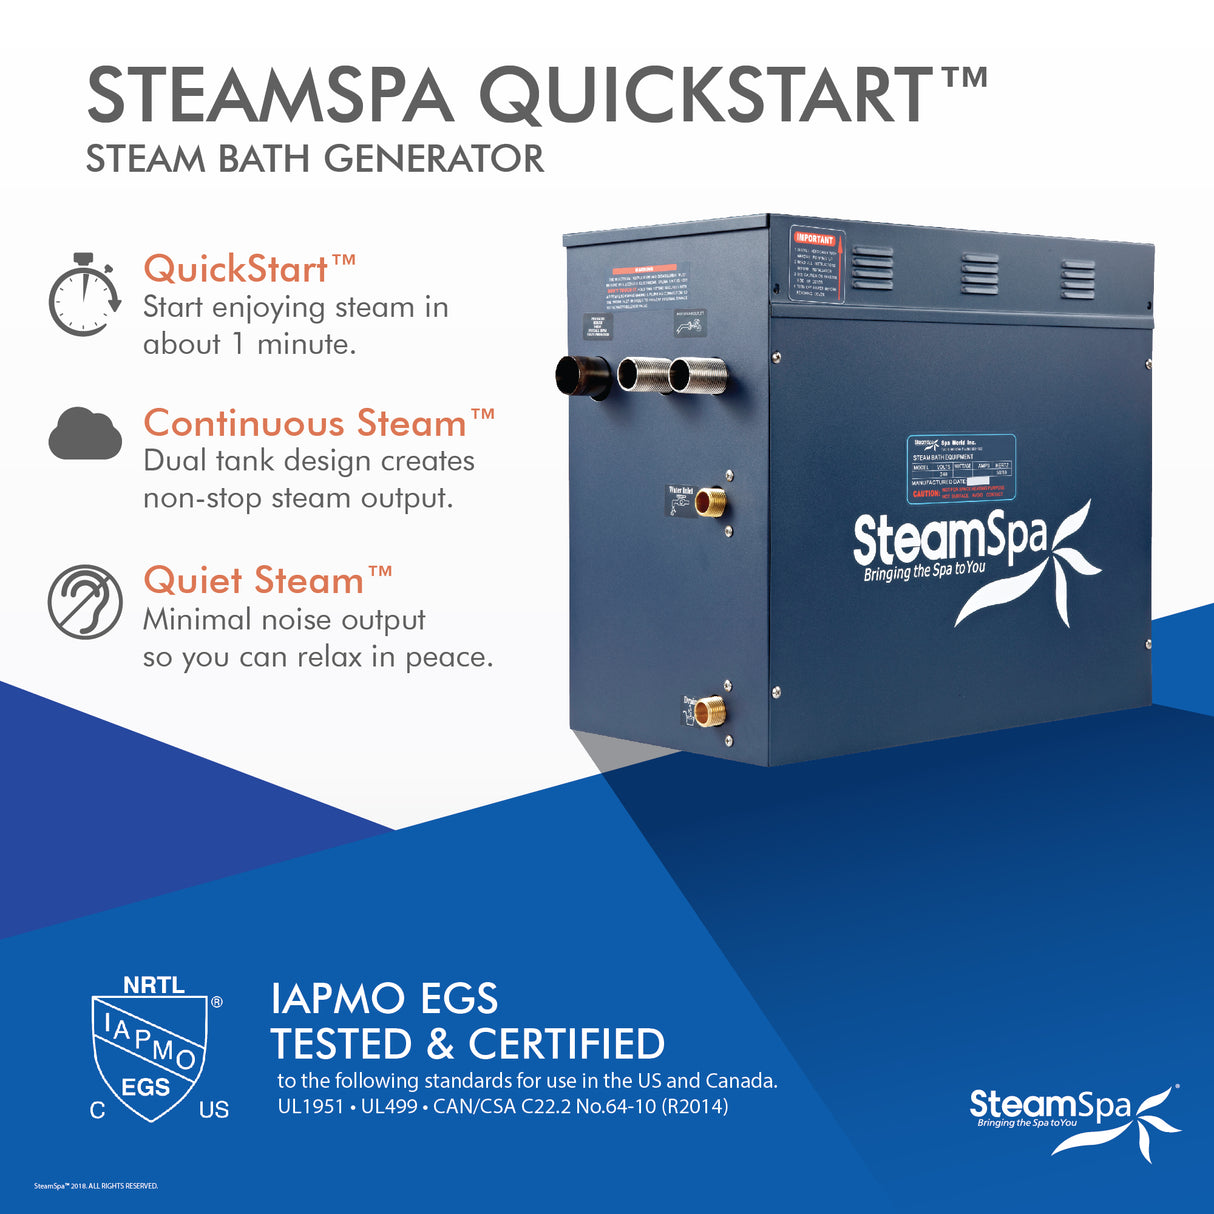 SteamSpa Royal 12 KW QuickStart Acu-Steam Bath Generator Package with Built-in Auto Drain in Oil Rubbed Bronze RYT1200OB-A